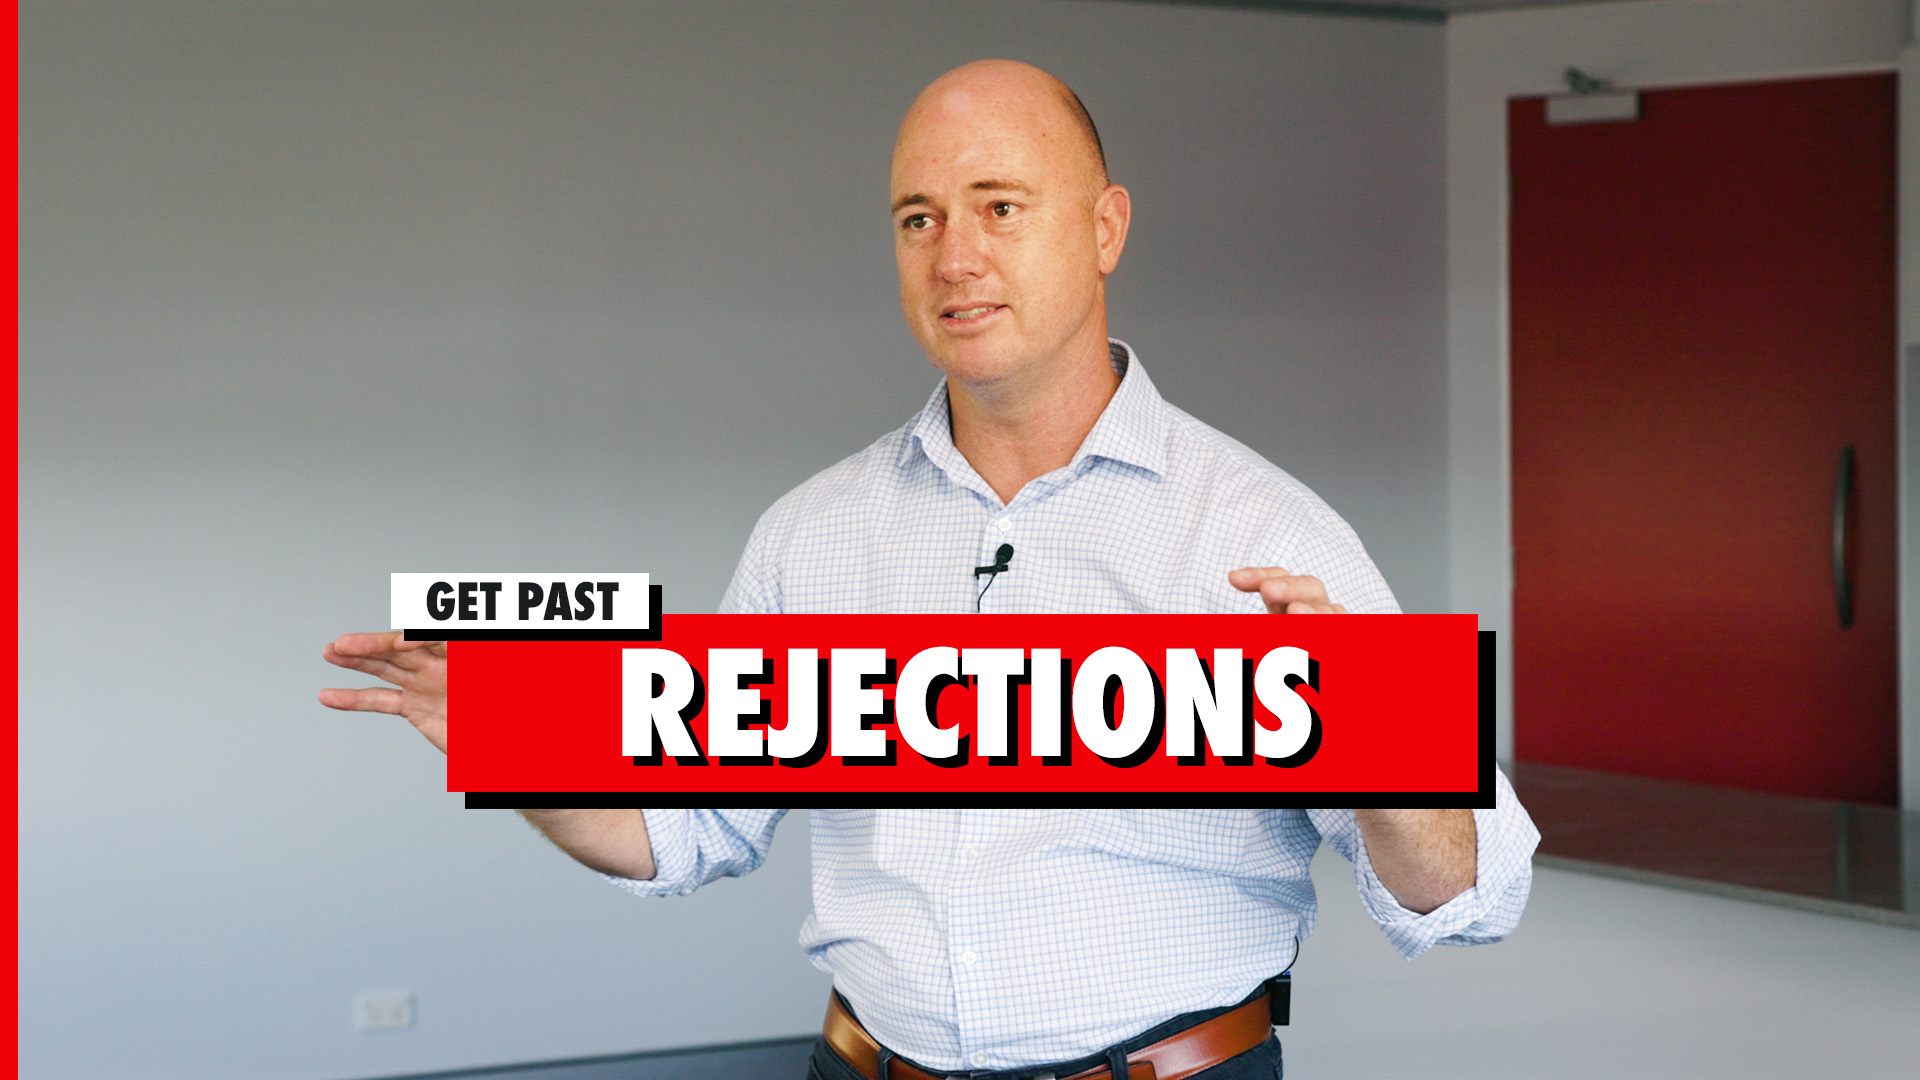 Trevor Ambrose Public Speaking Sales Training How To Take Rejection Thumbnail Website